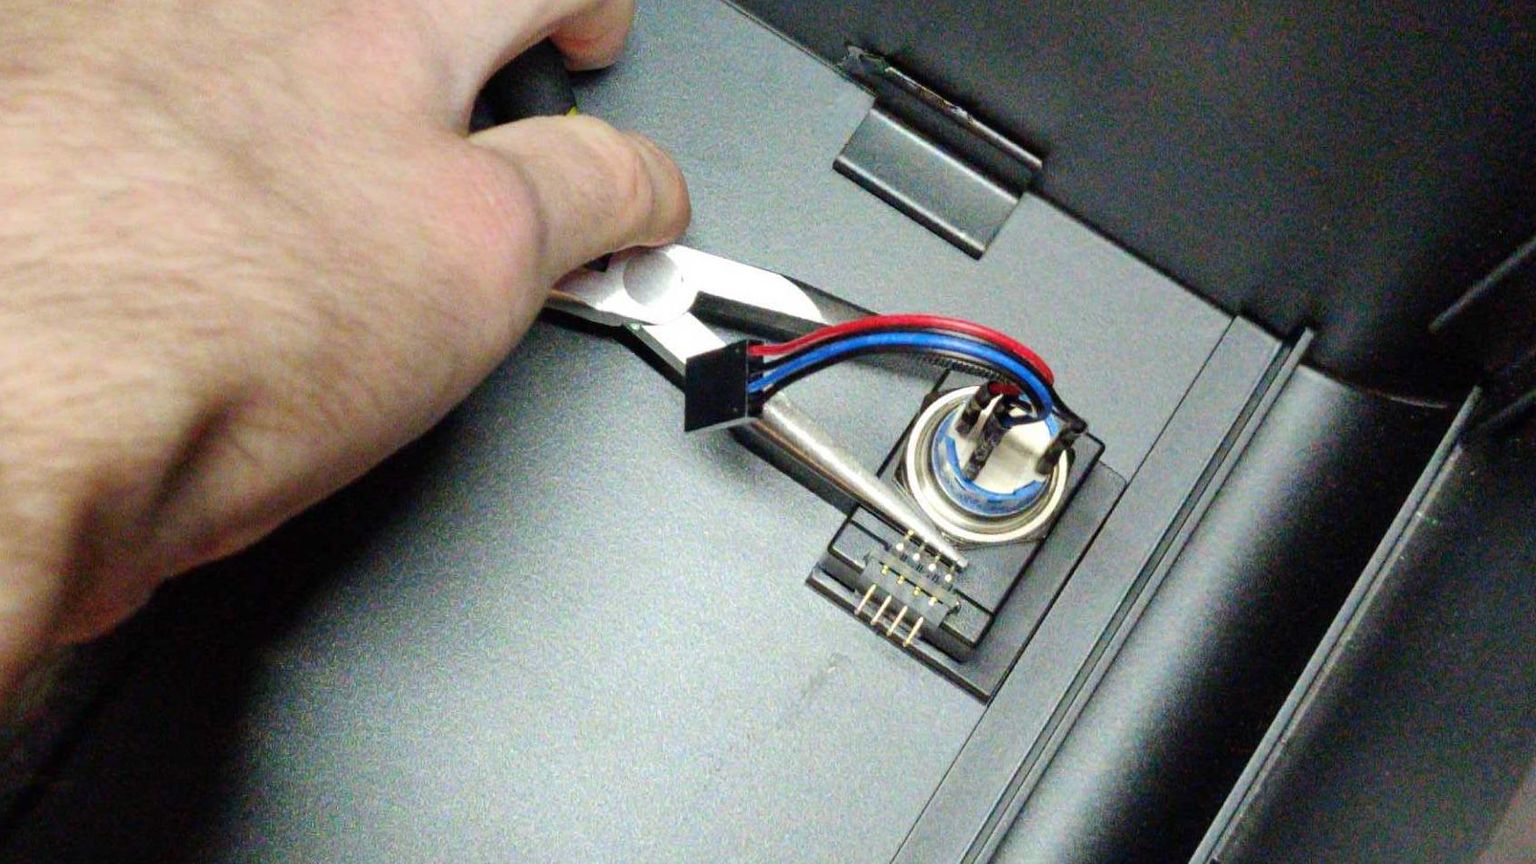 Screwing in the power button